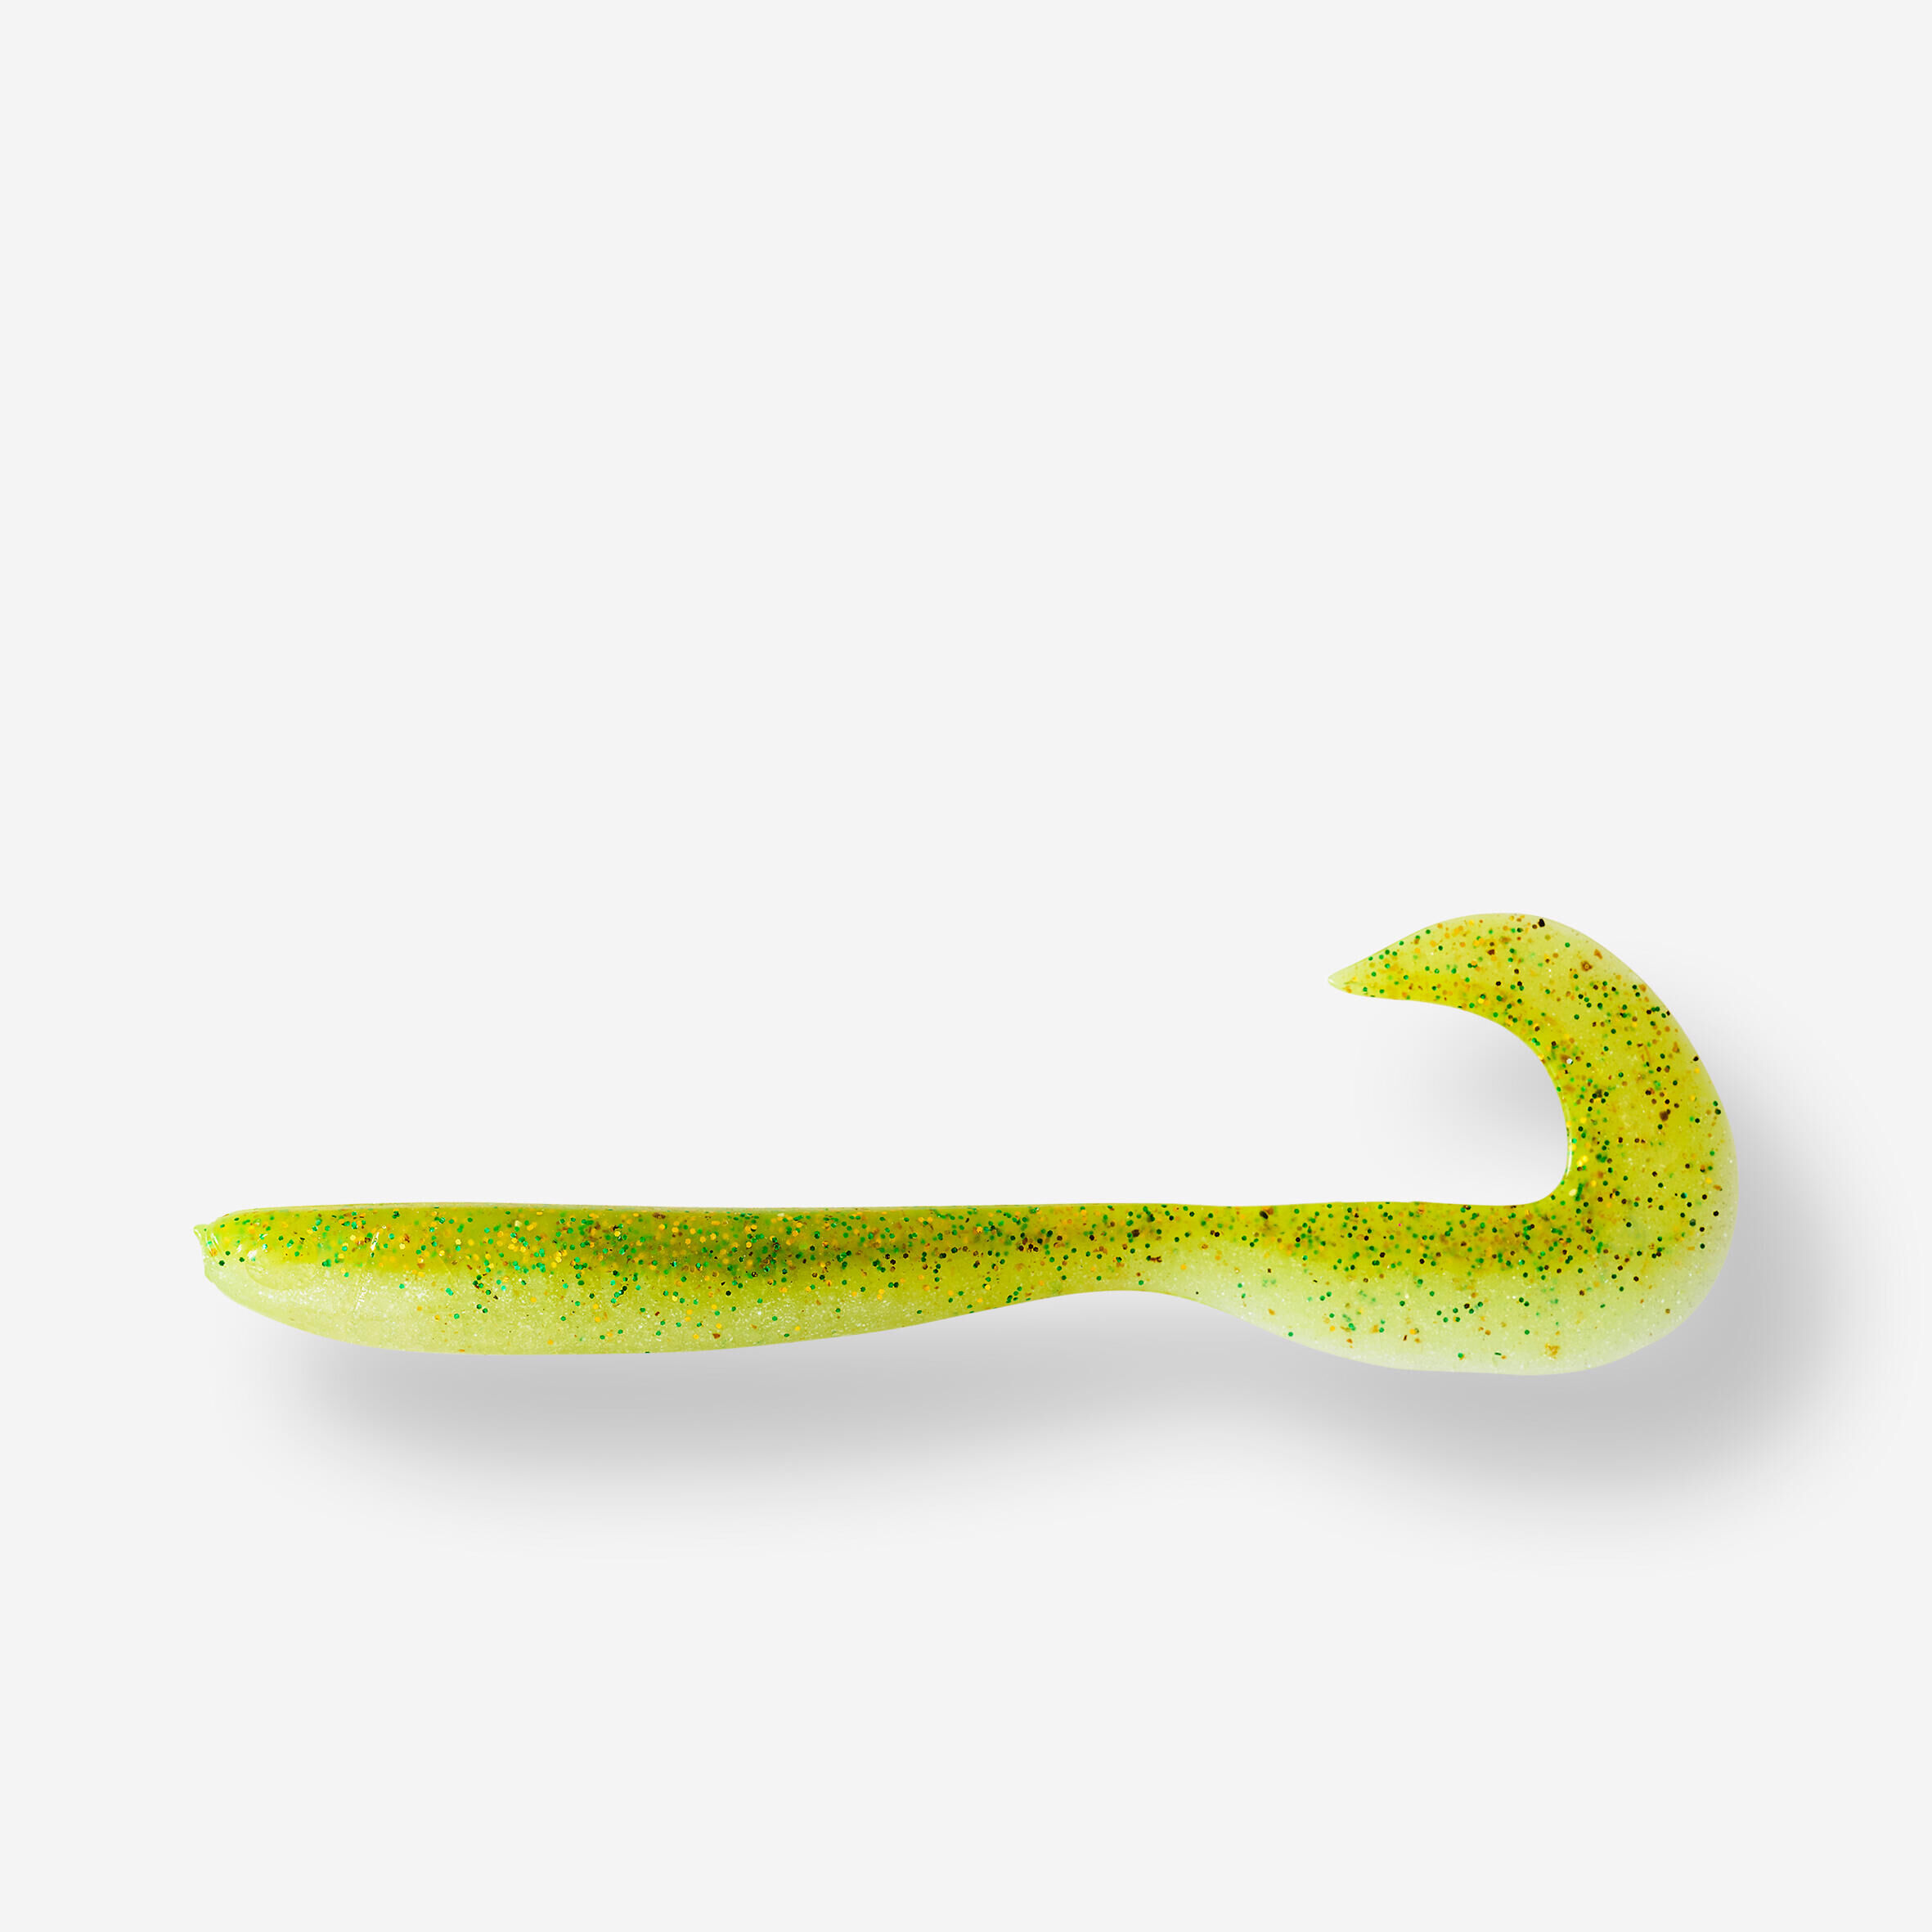 CAPERLAN GRUB SHAPED SOFT LURE WITH ATTRACTANT WXM YUBARI GRB 90 CHARTREUSE